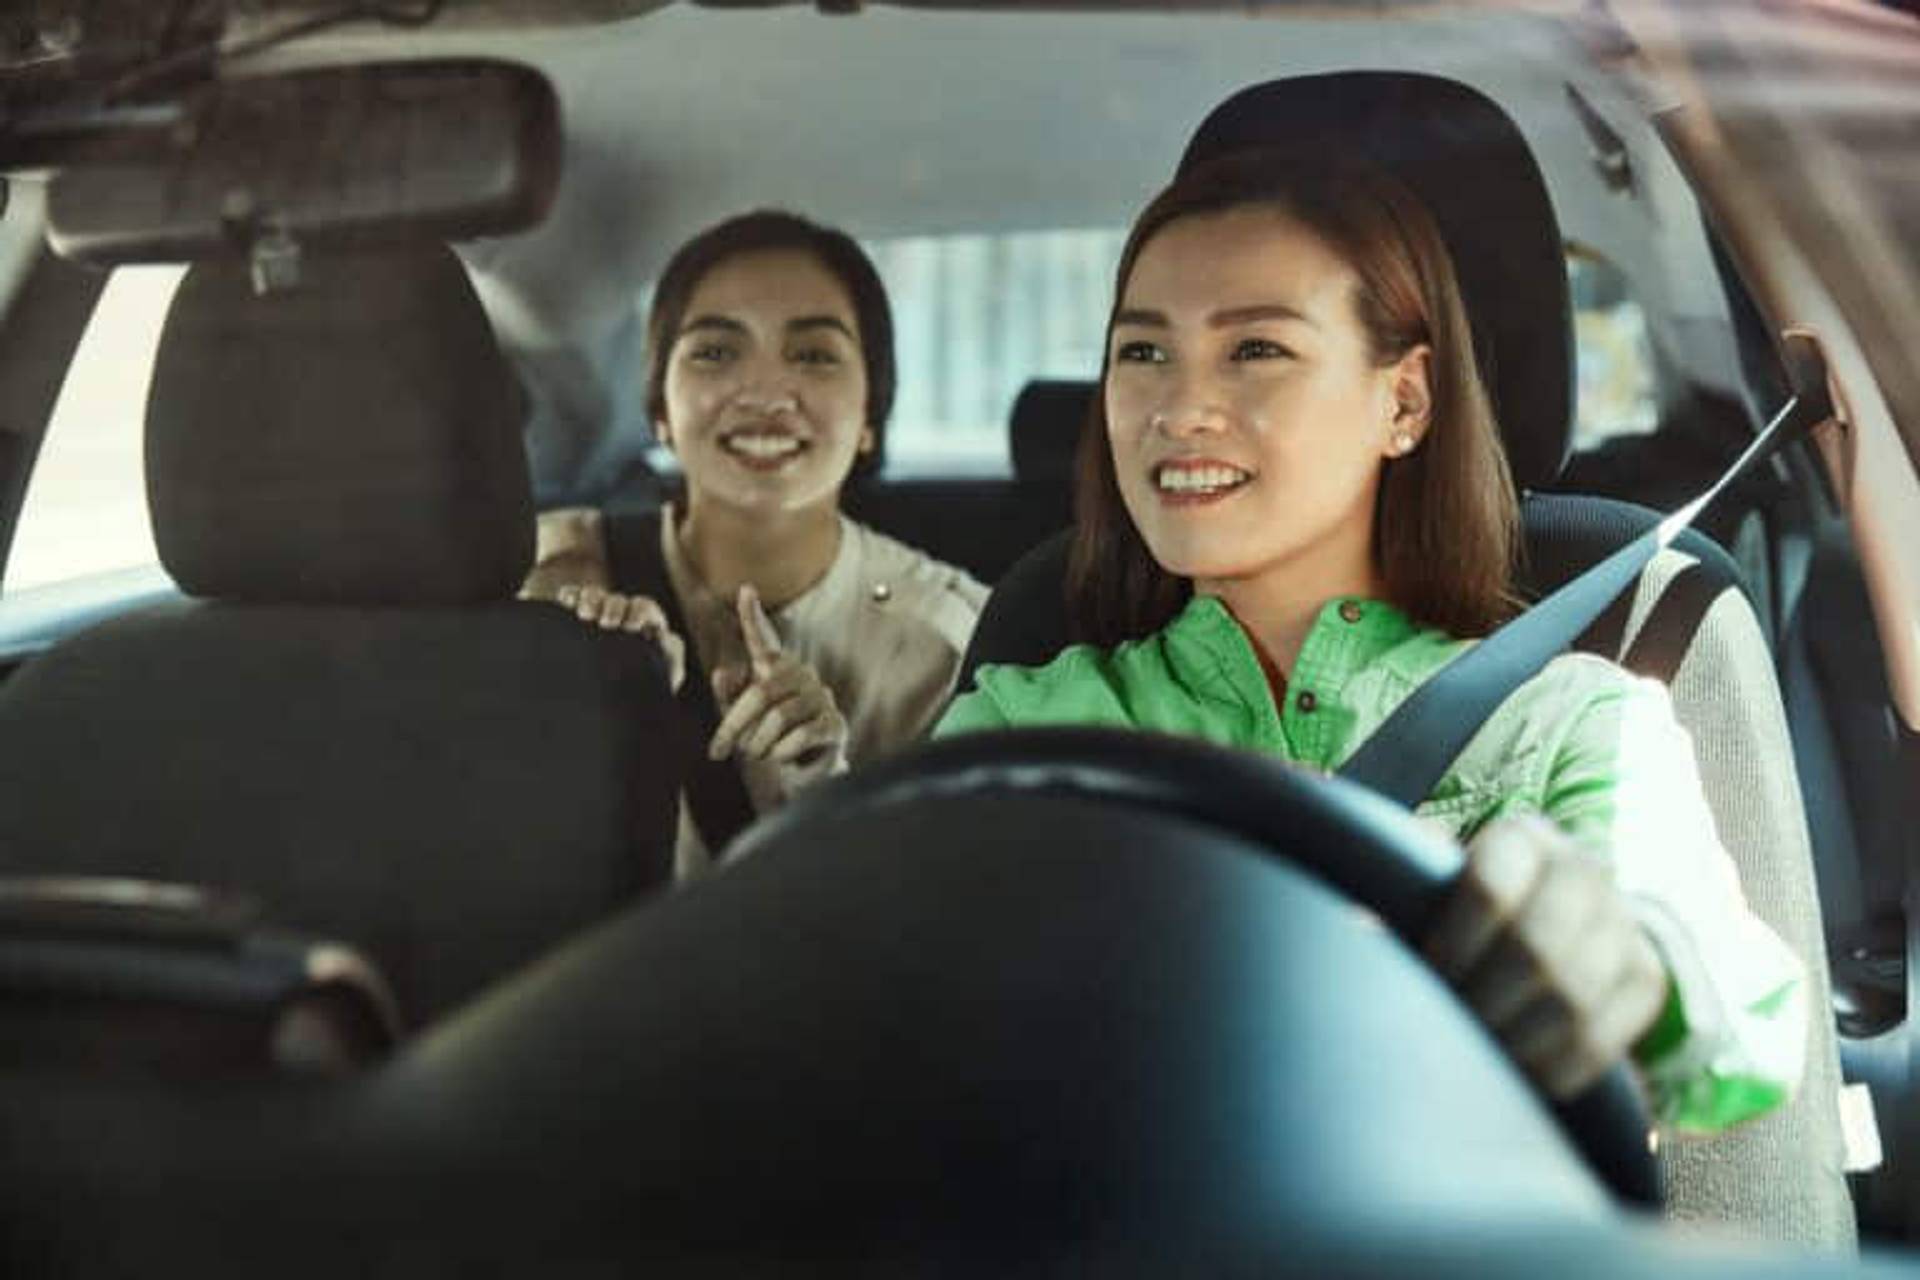 Grab empowers female passengers in Asia 